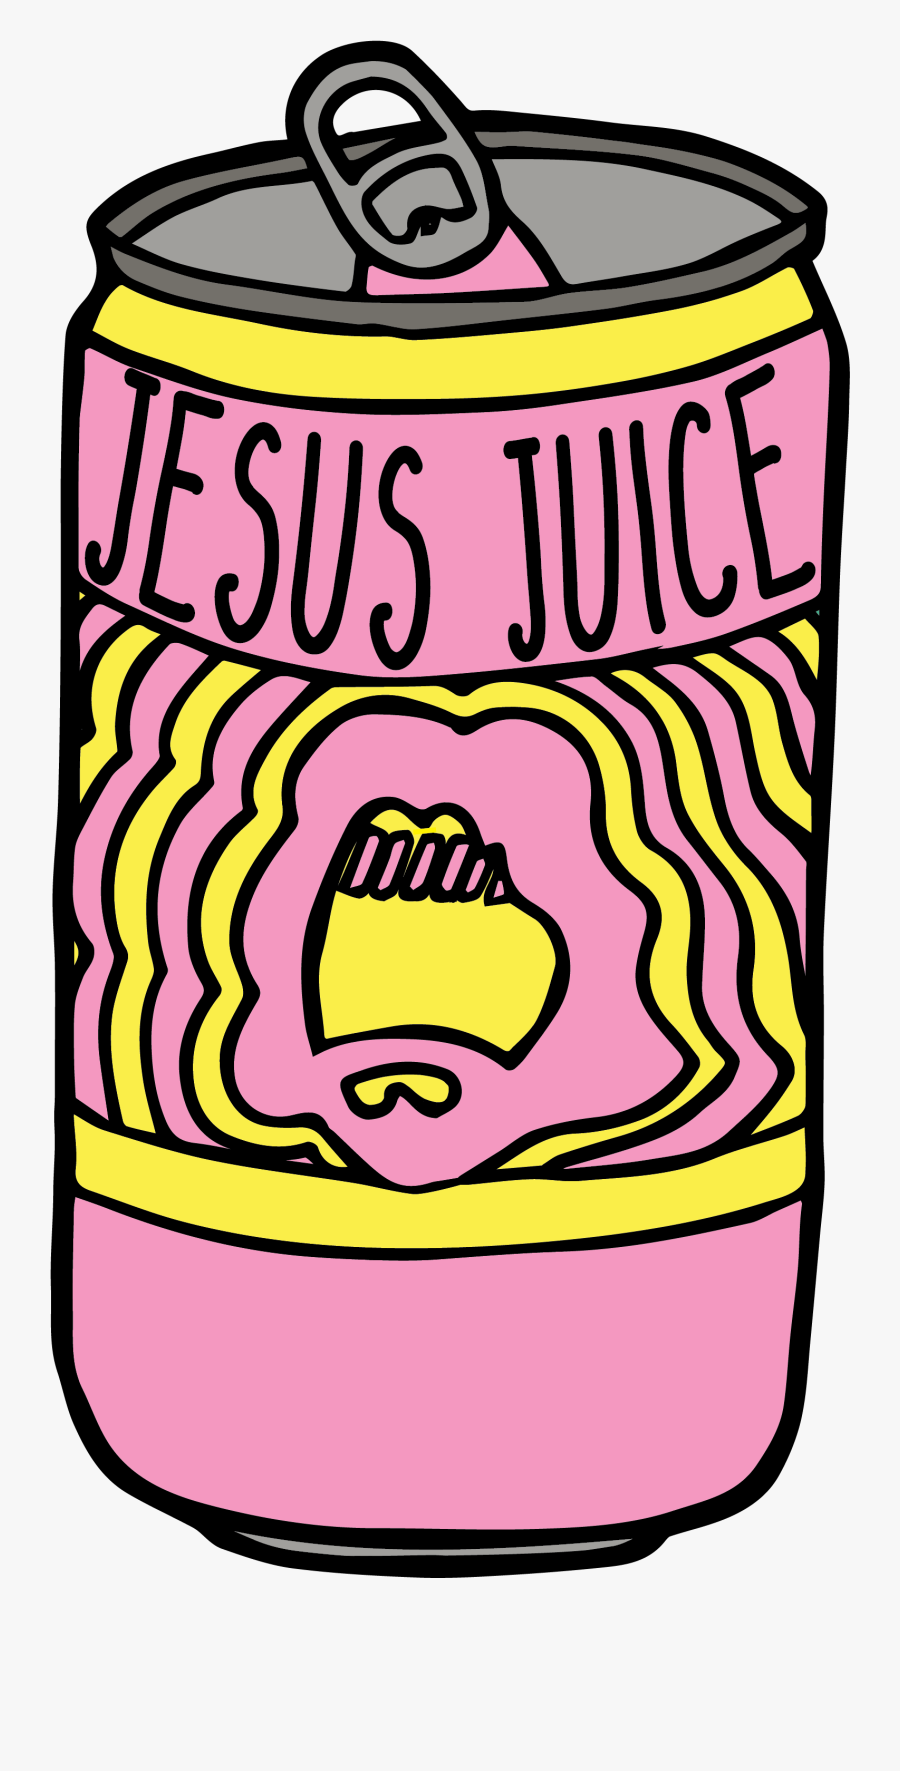 Graphic Design Work Including Logos And Fashion Design - Jesus Juice Clothing, Transparent Clipart